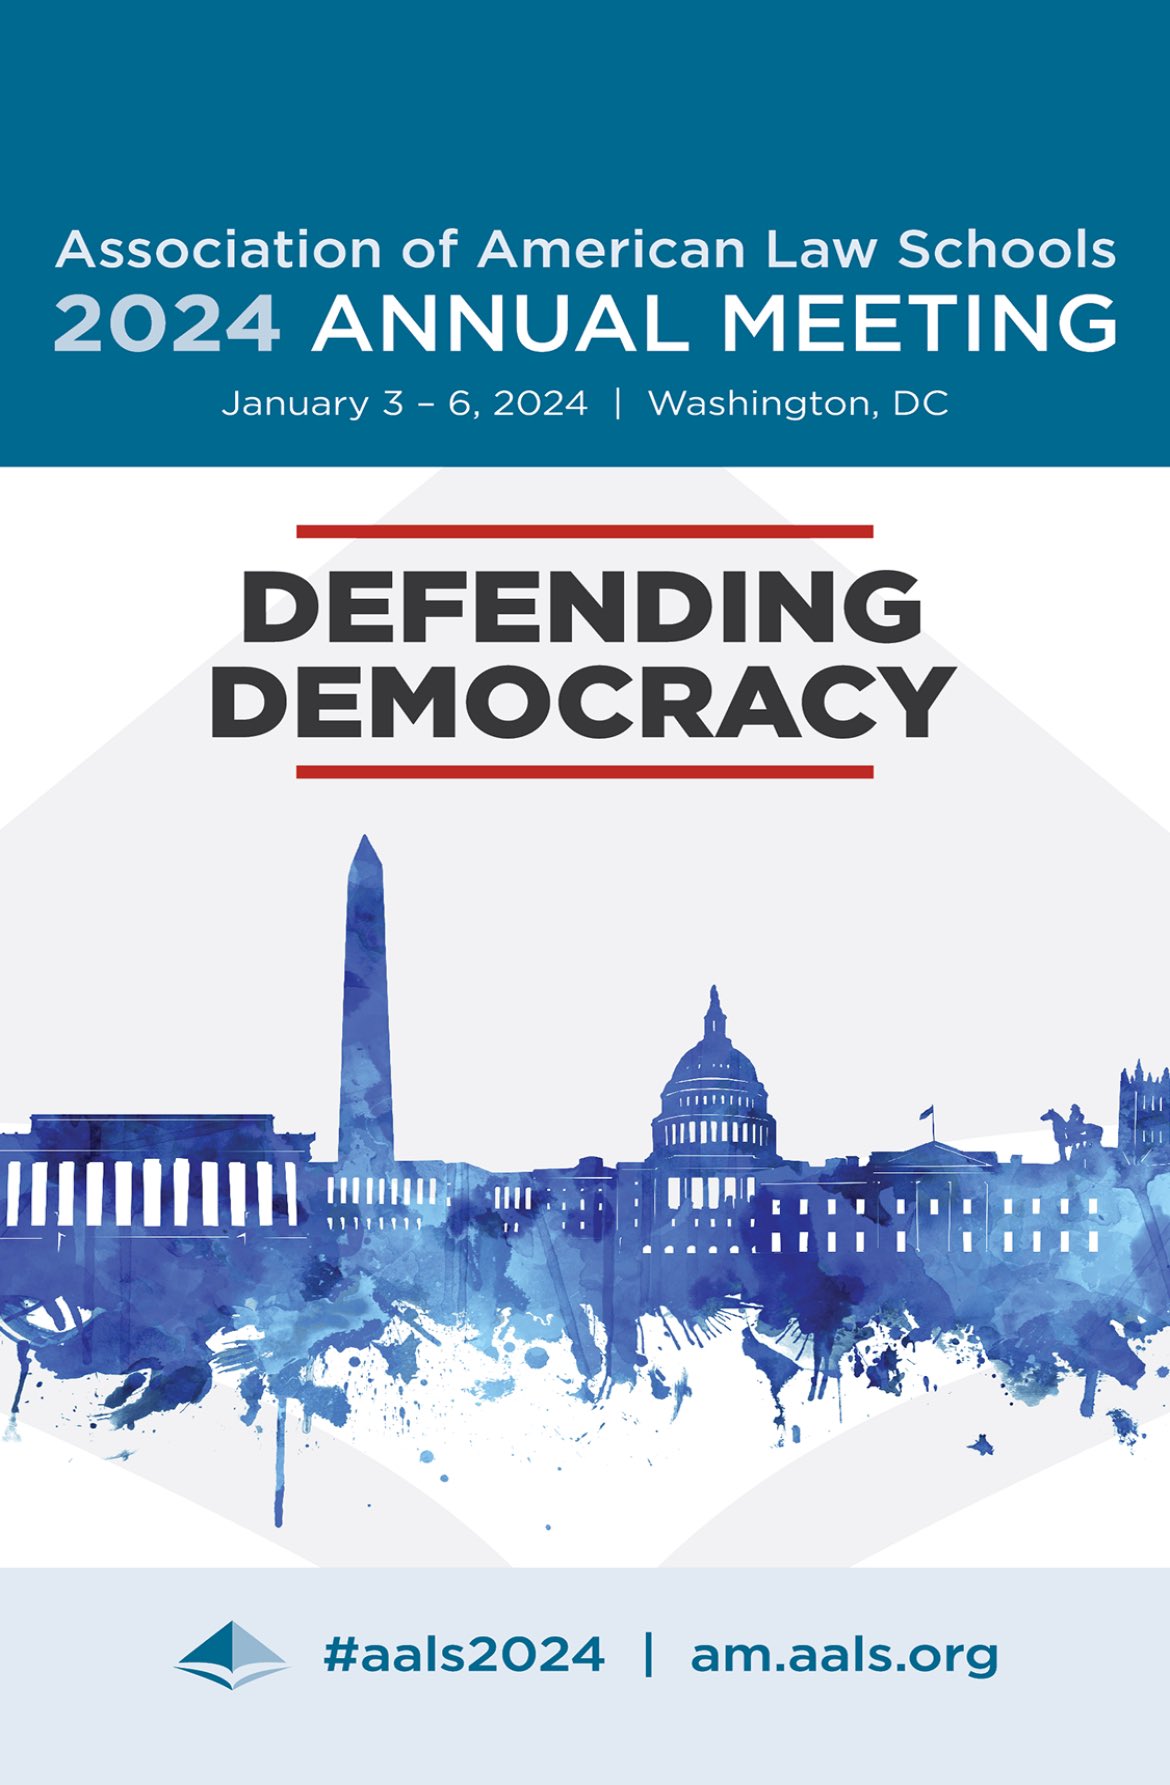 UCI Law Leadership and Presenters at 2024 AALS Annual Meeting: “Defending Democracy” 